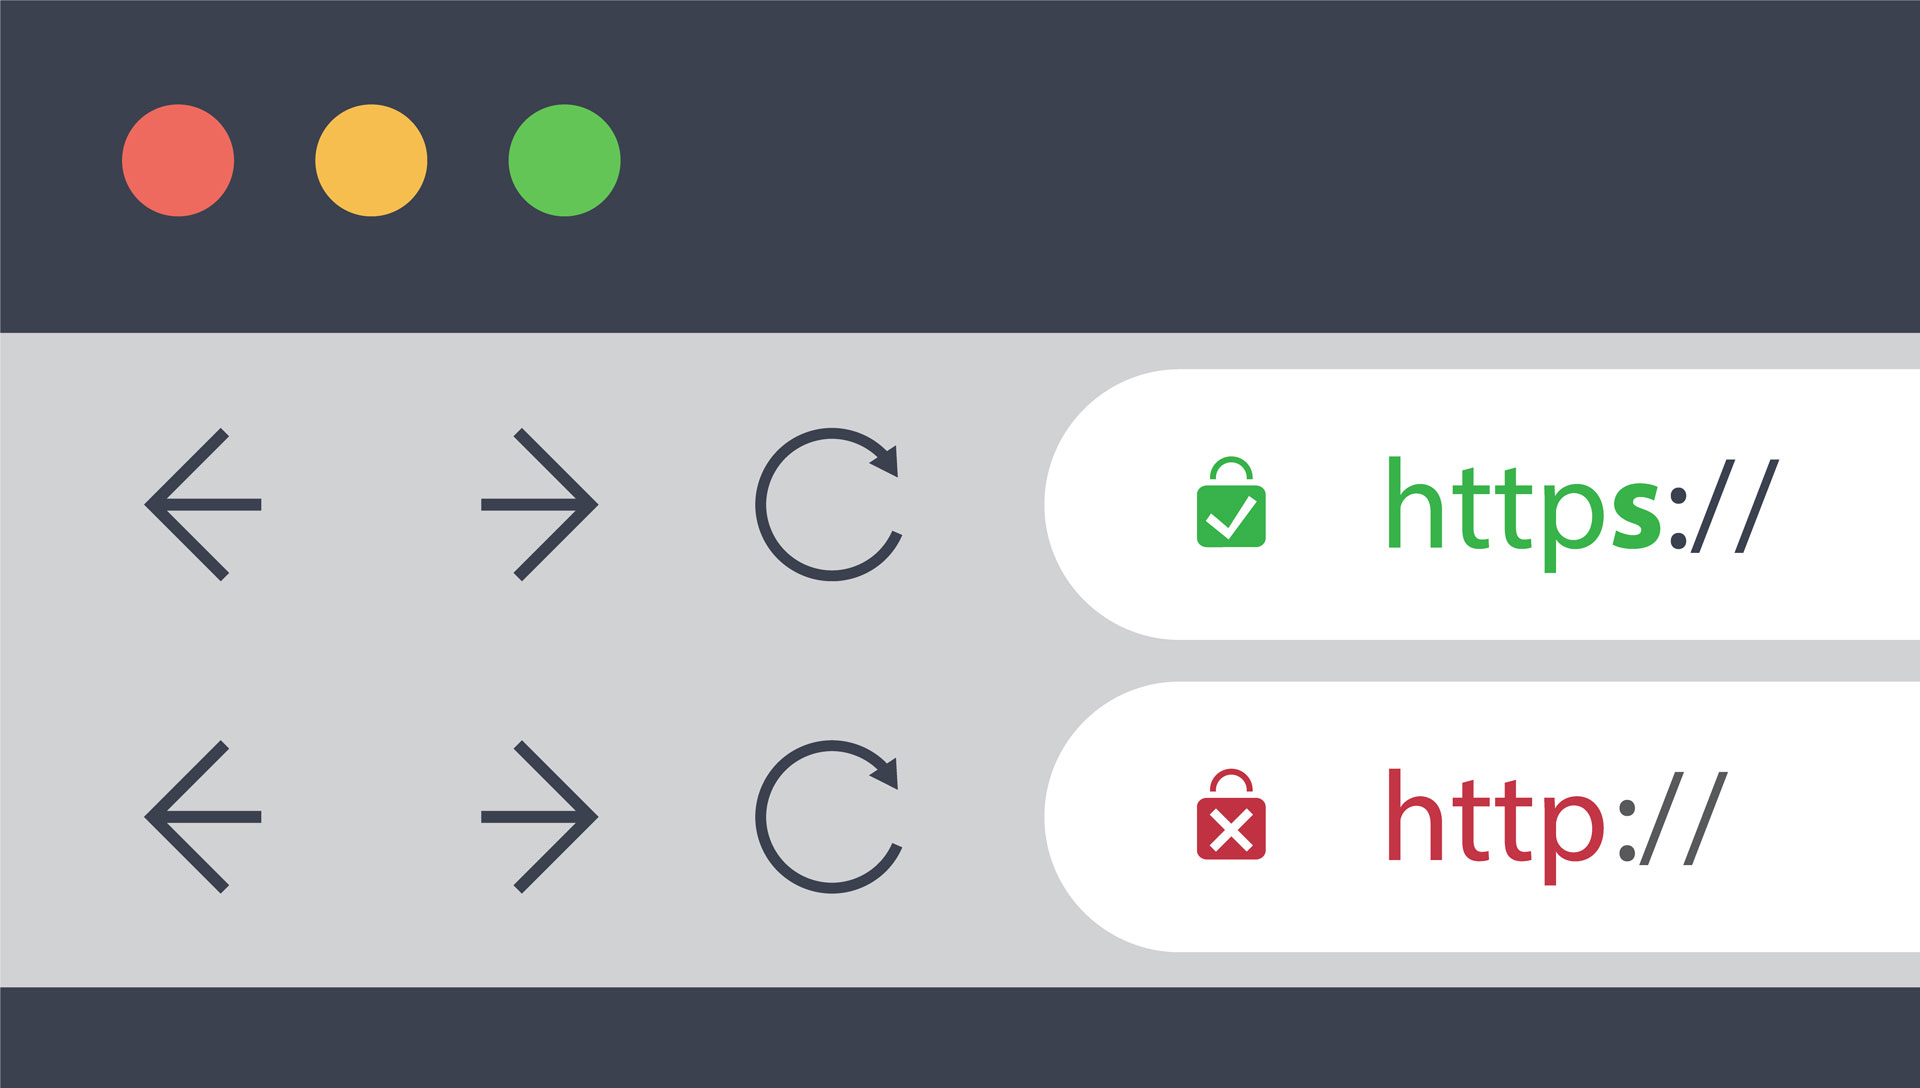 browser address bars showing secure and not secure web addresses